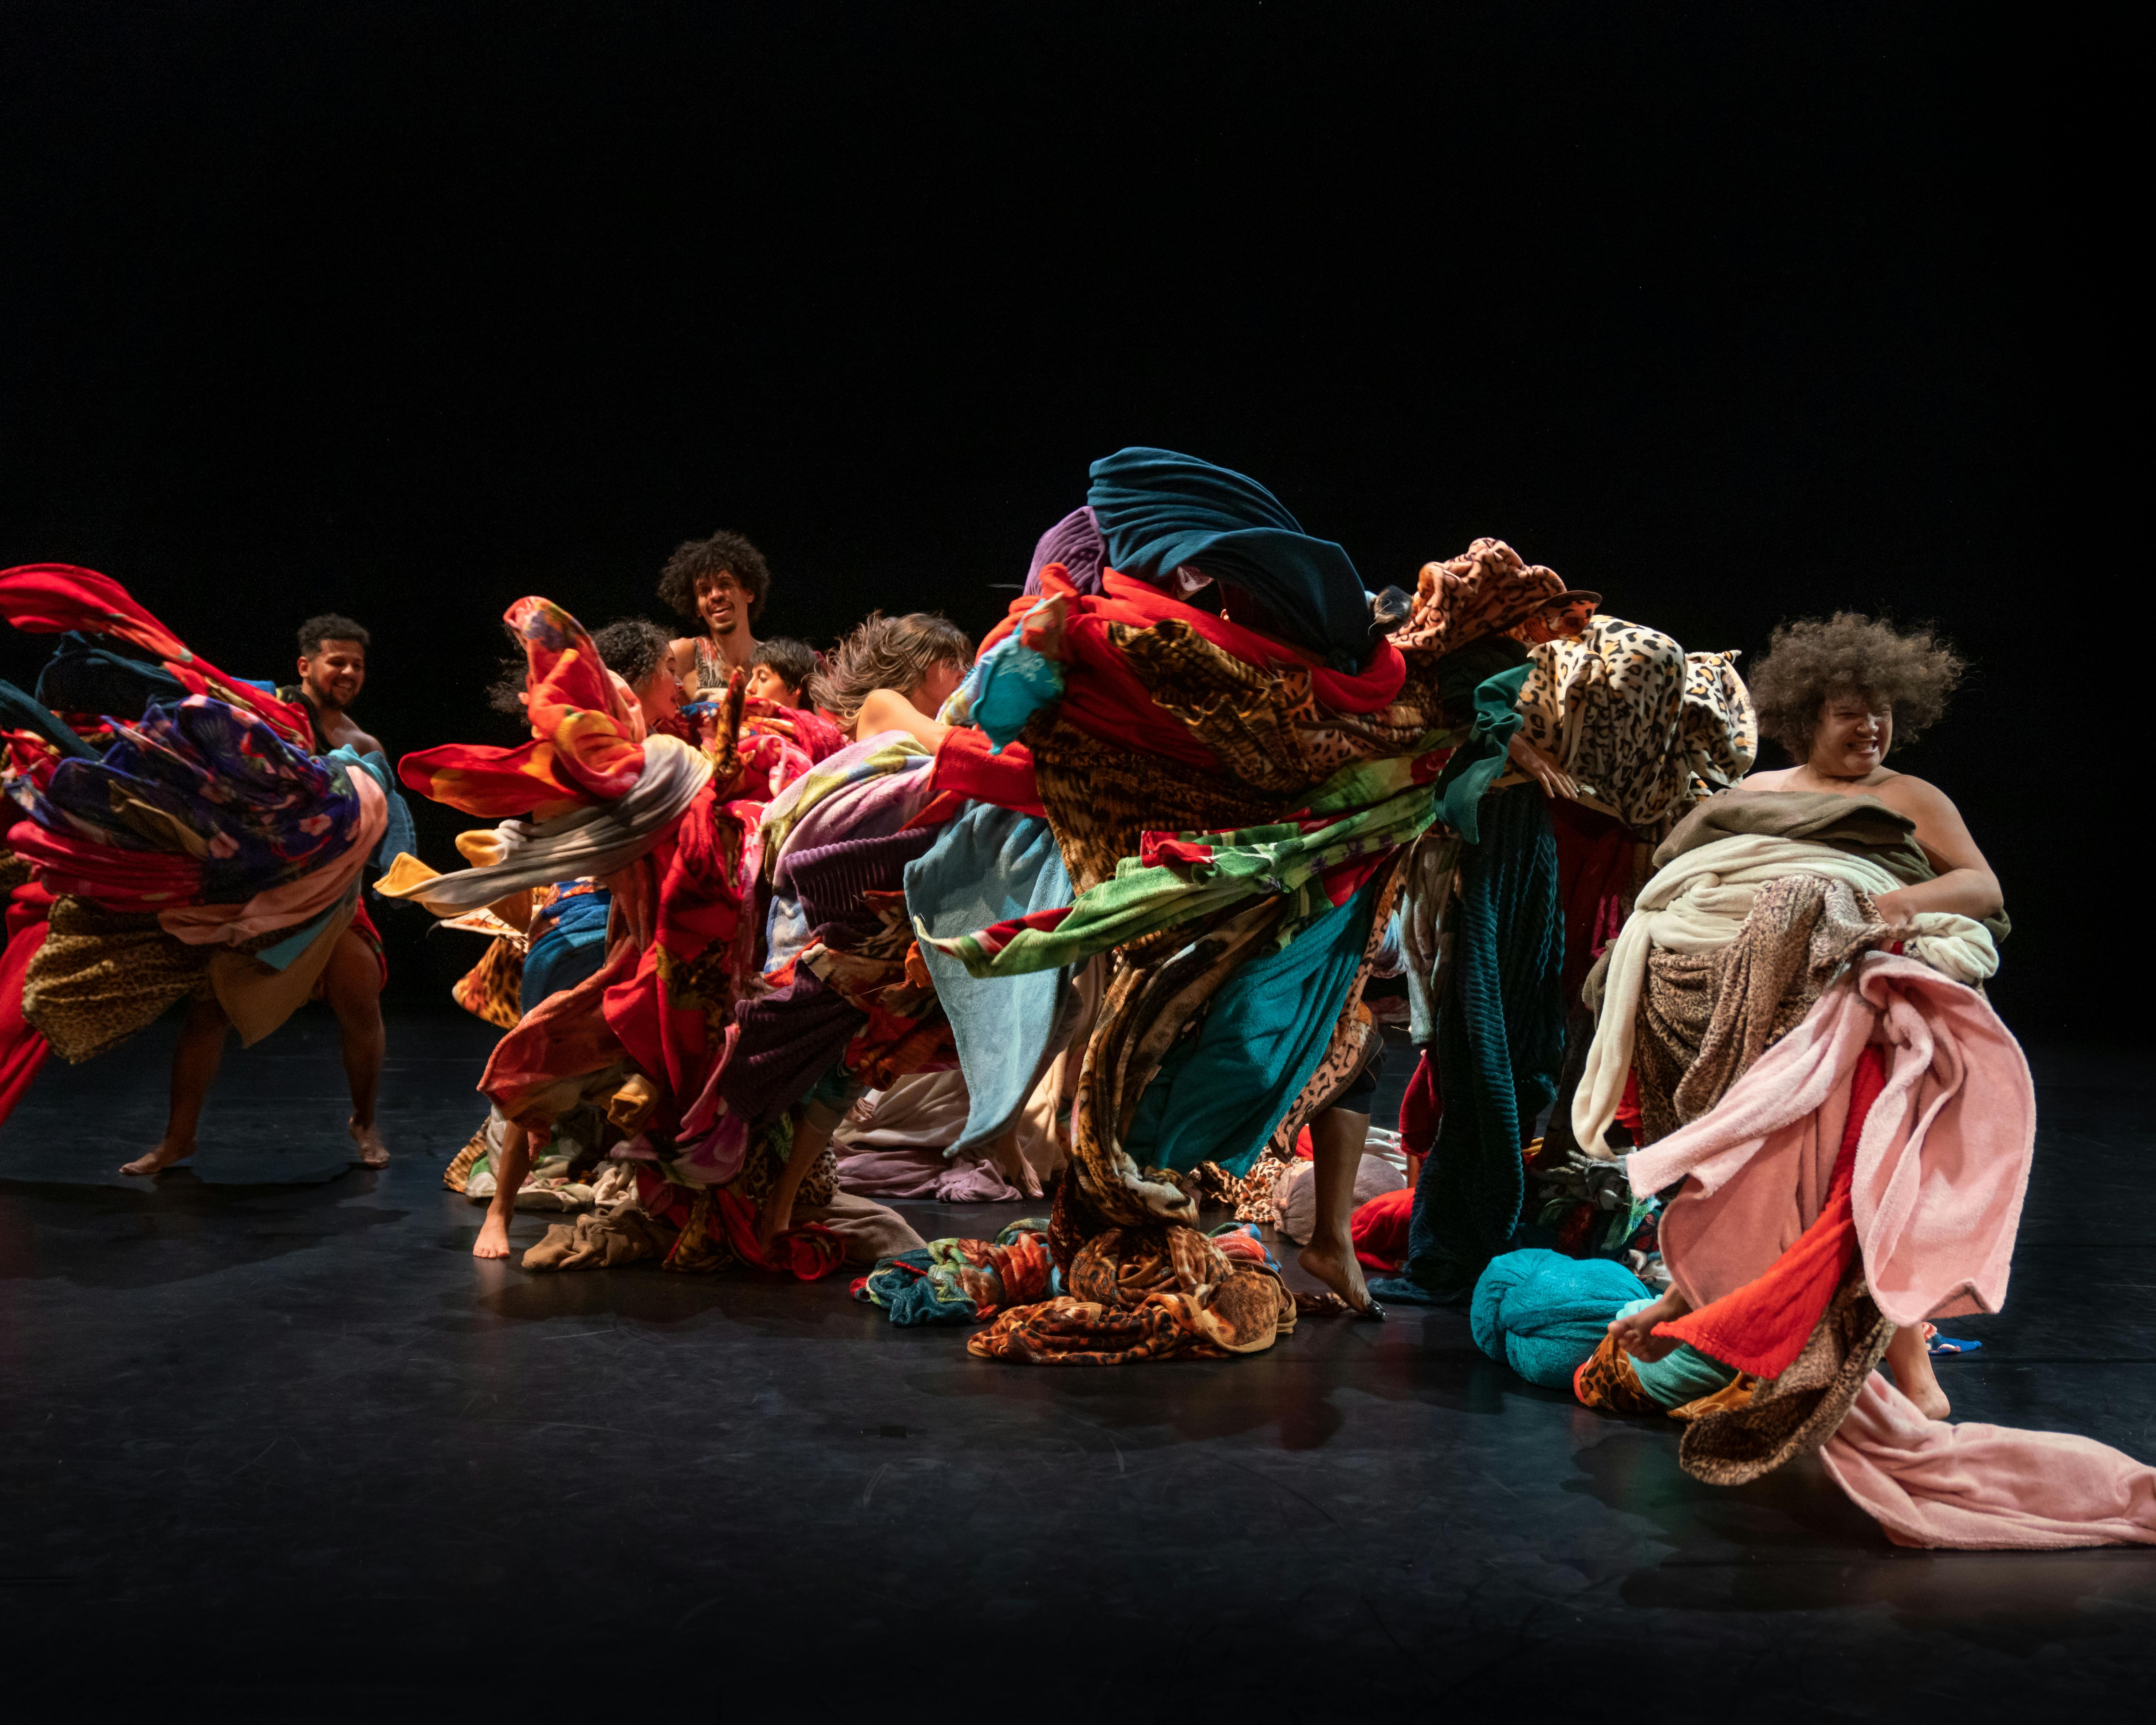 Dancers on a dark background wrapped in many coloured fabrics